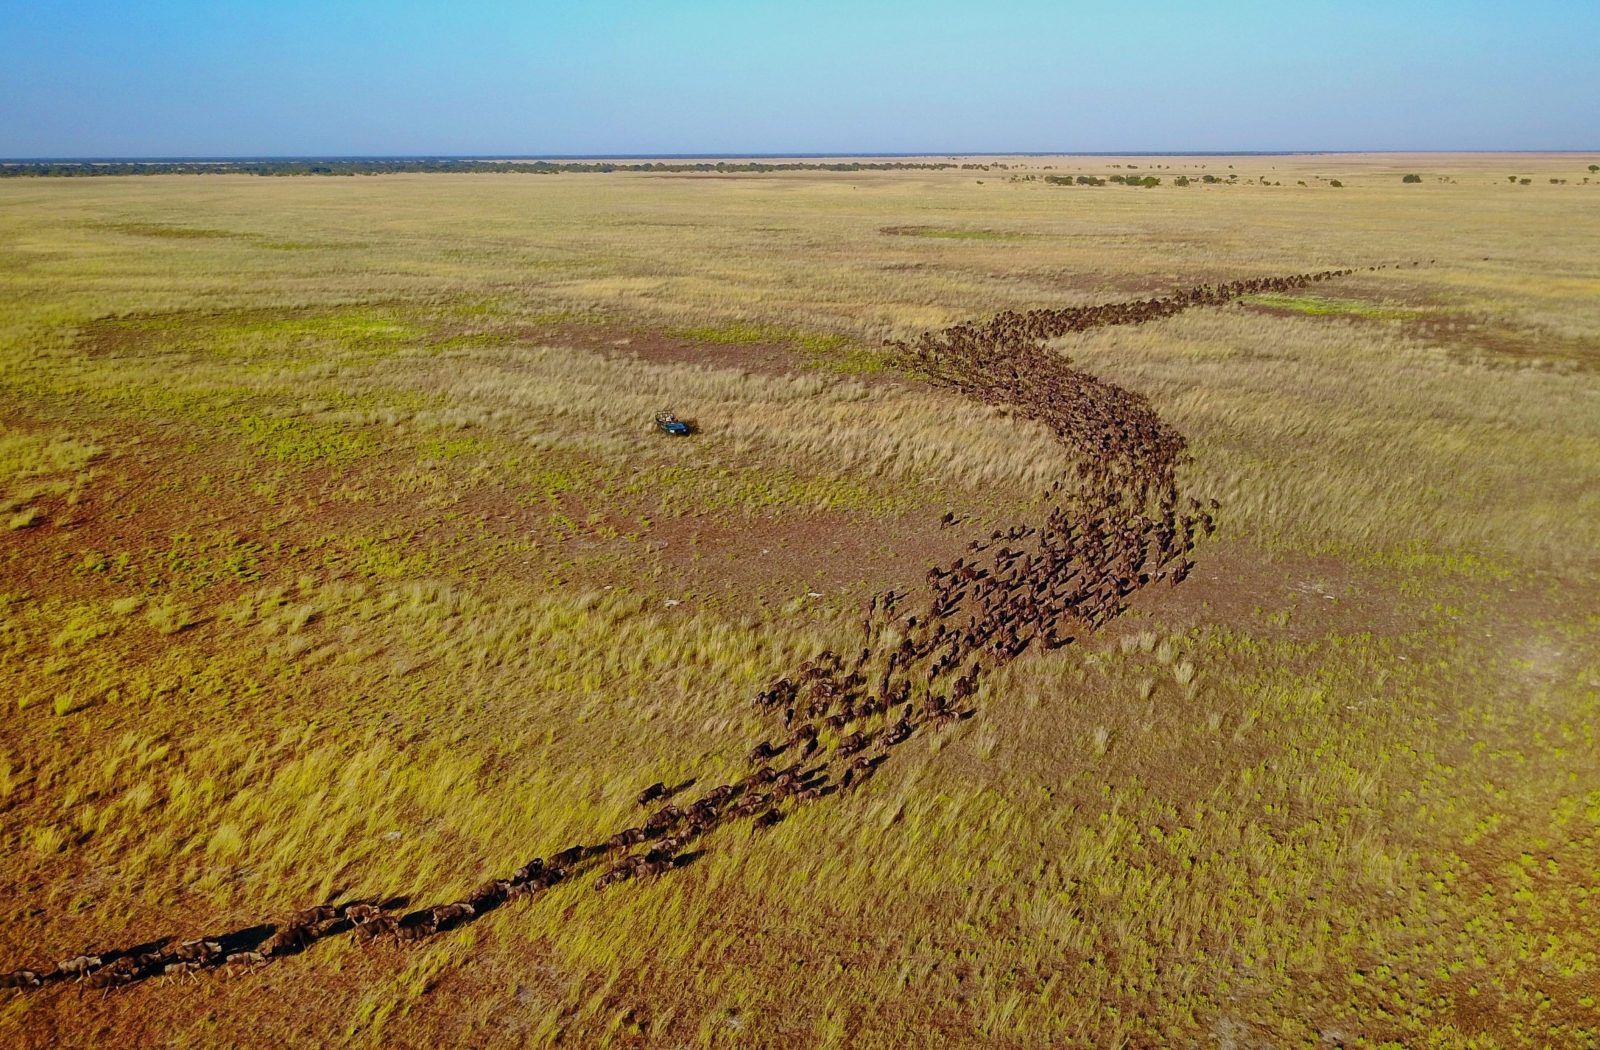 The second largest wildebeest migration is found in Luiwa Plain